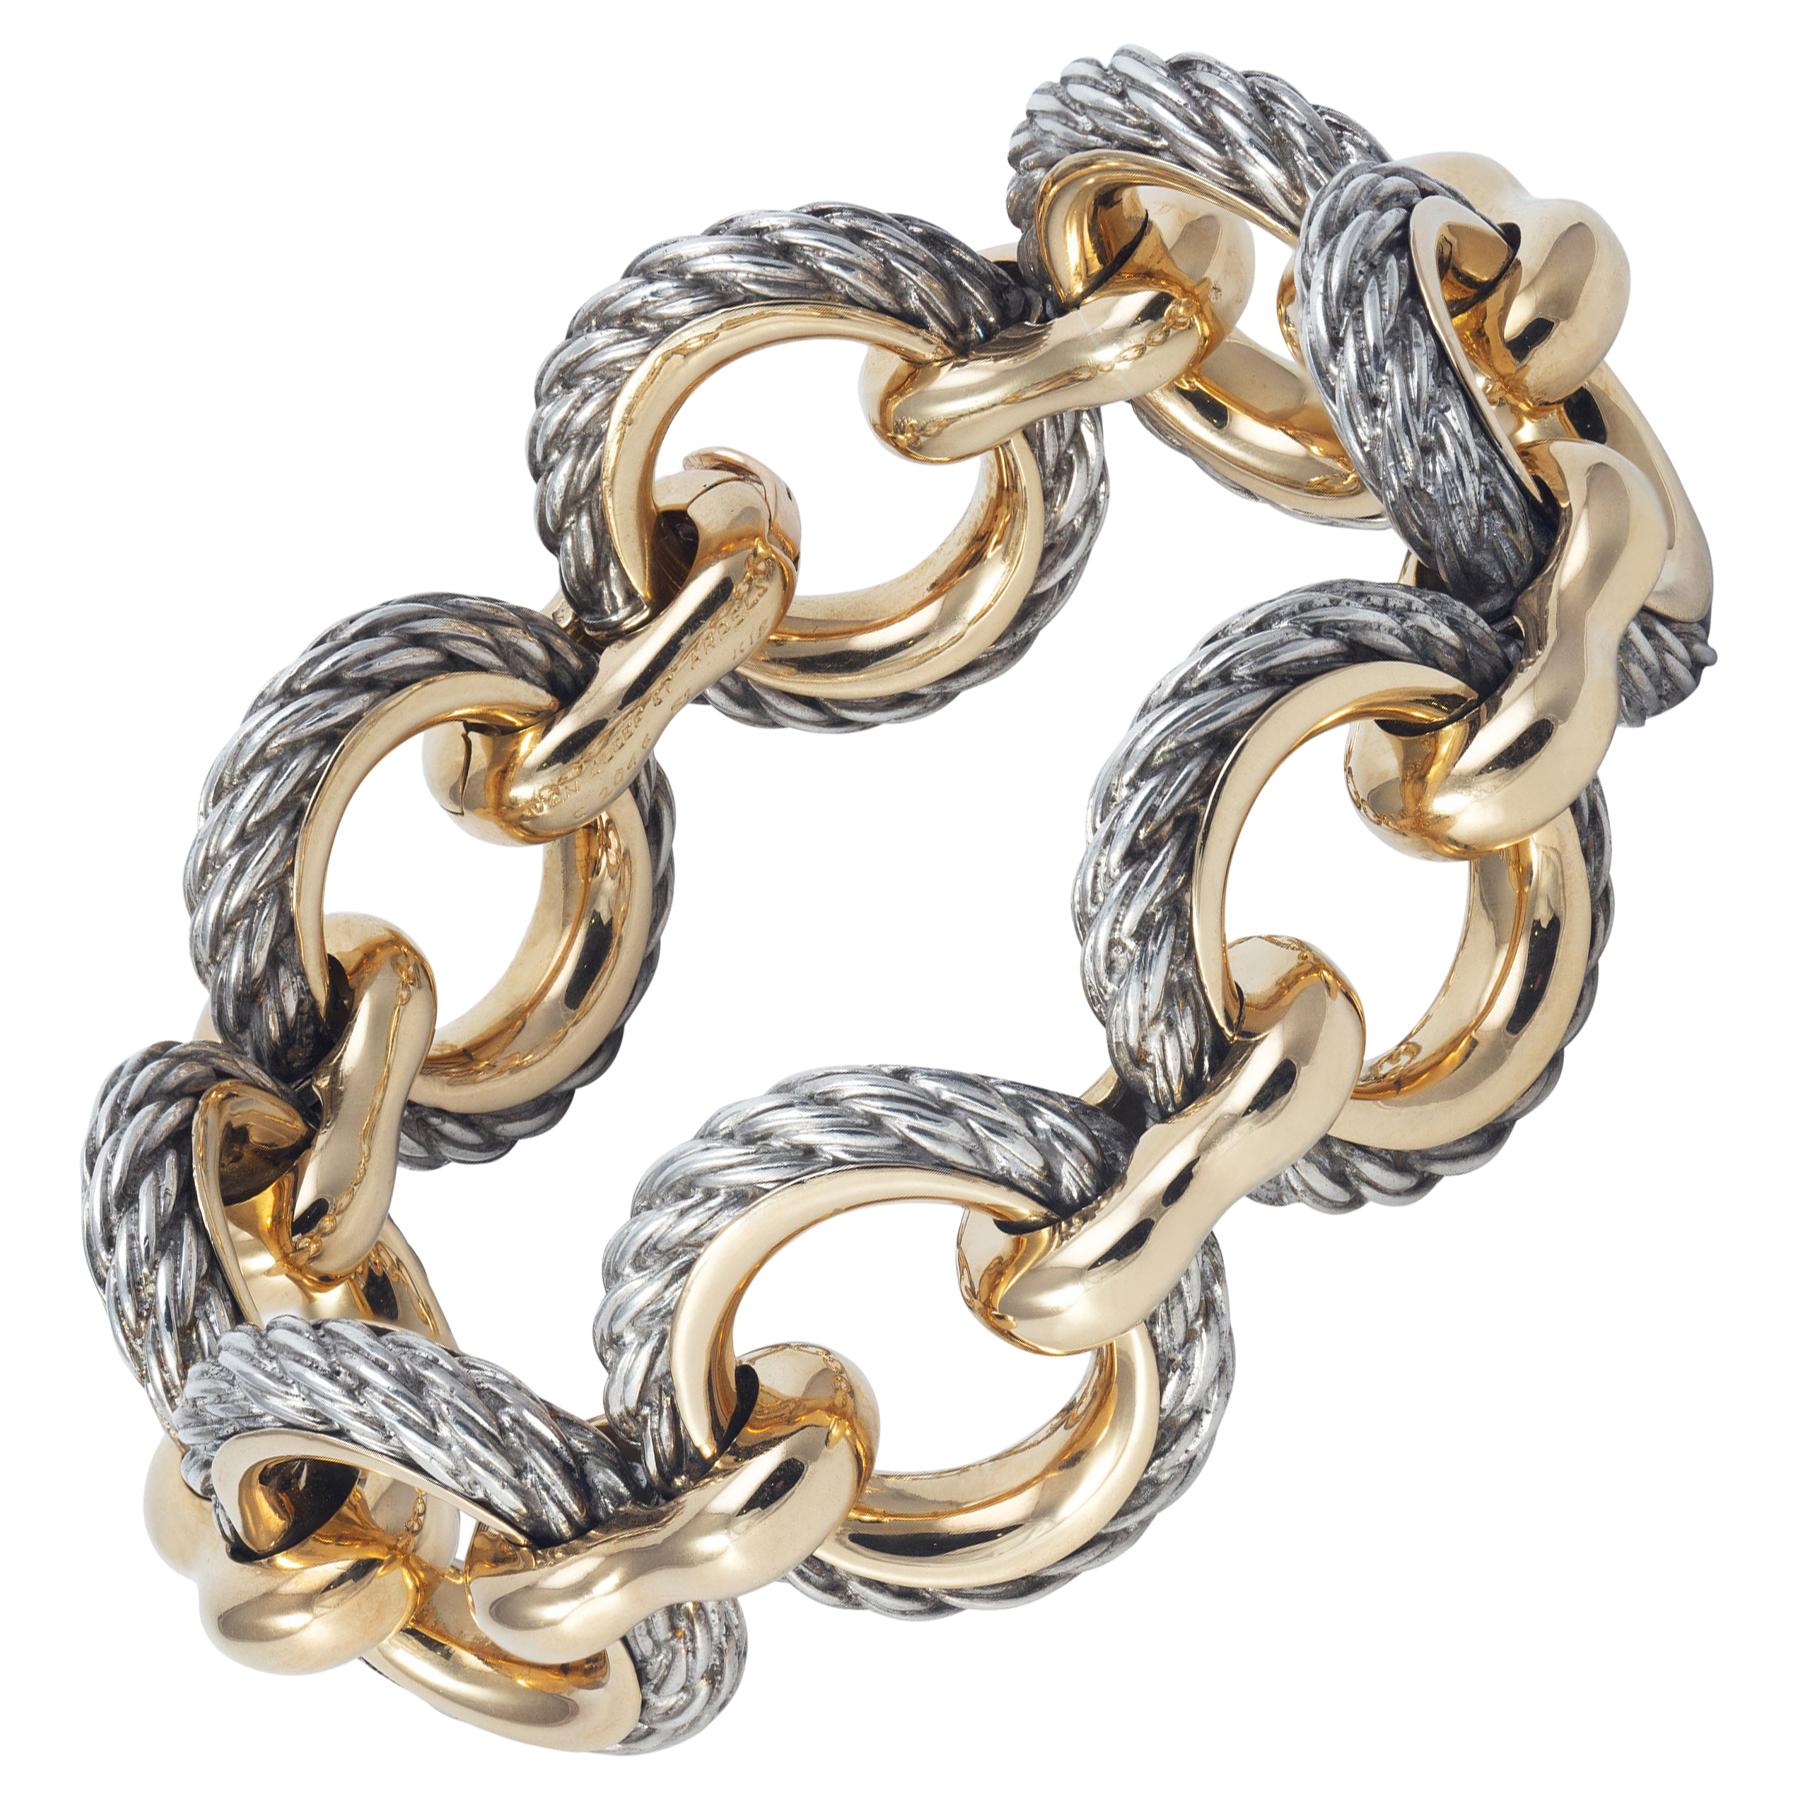 Van Cleef & Arpels Bracelet in Yellow Gold and silver.